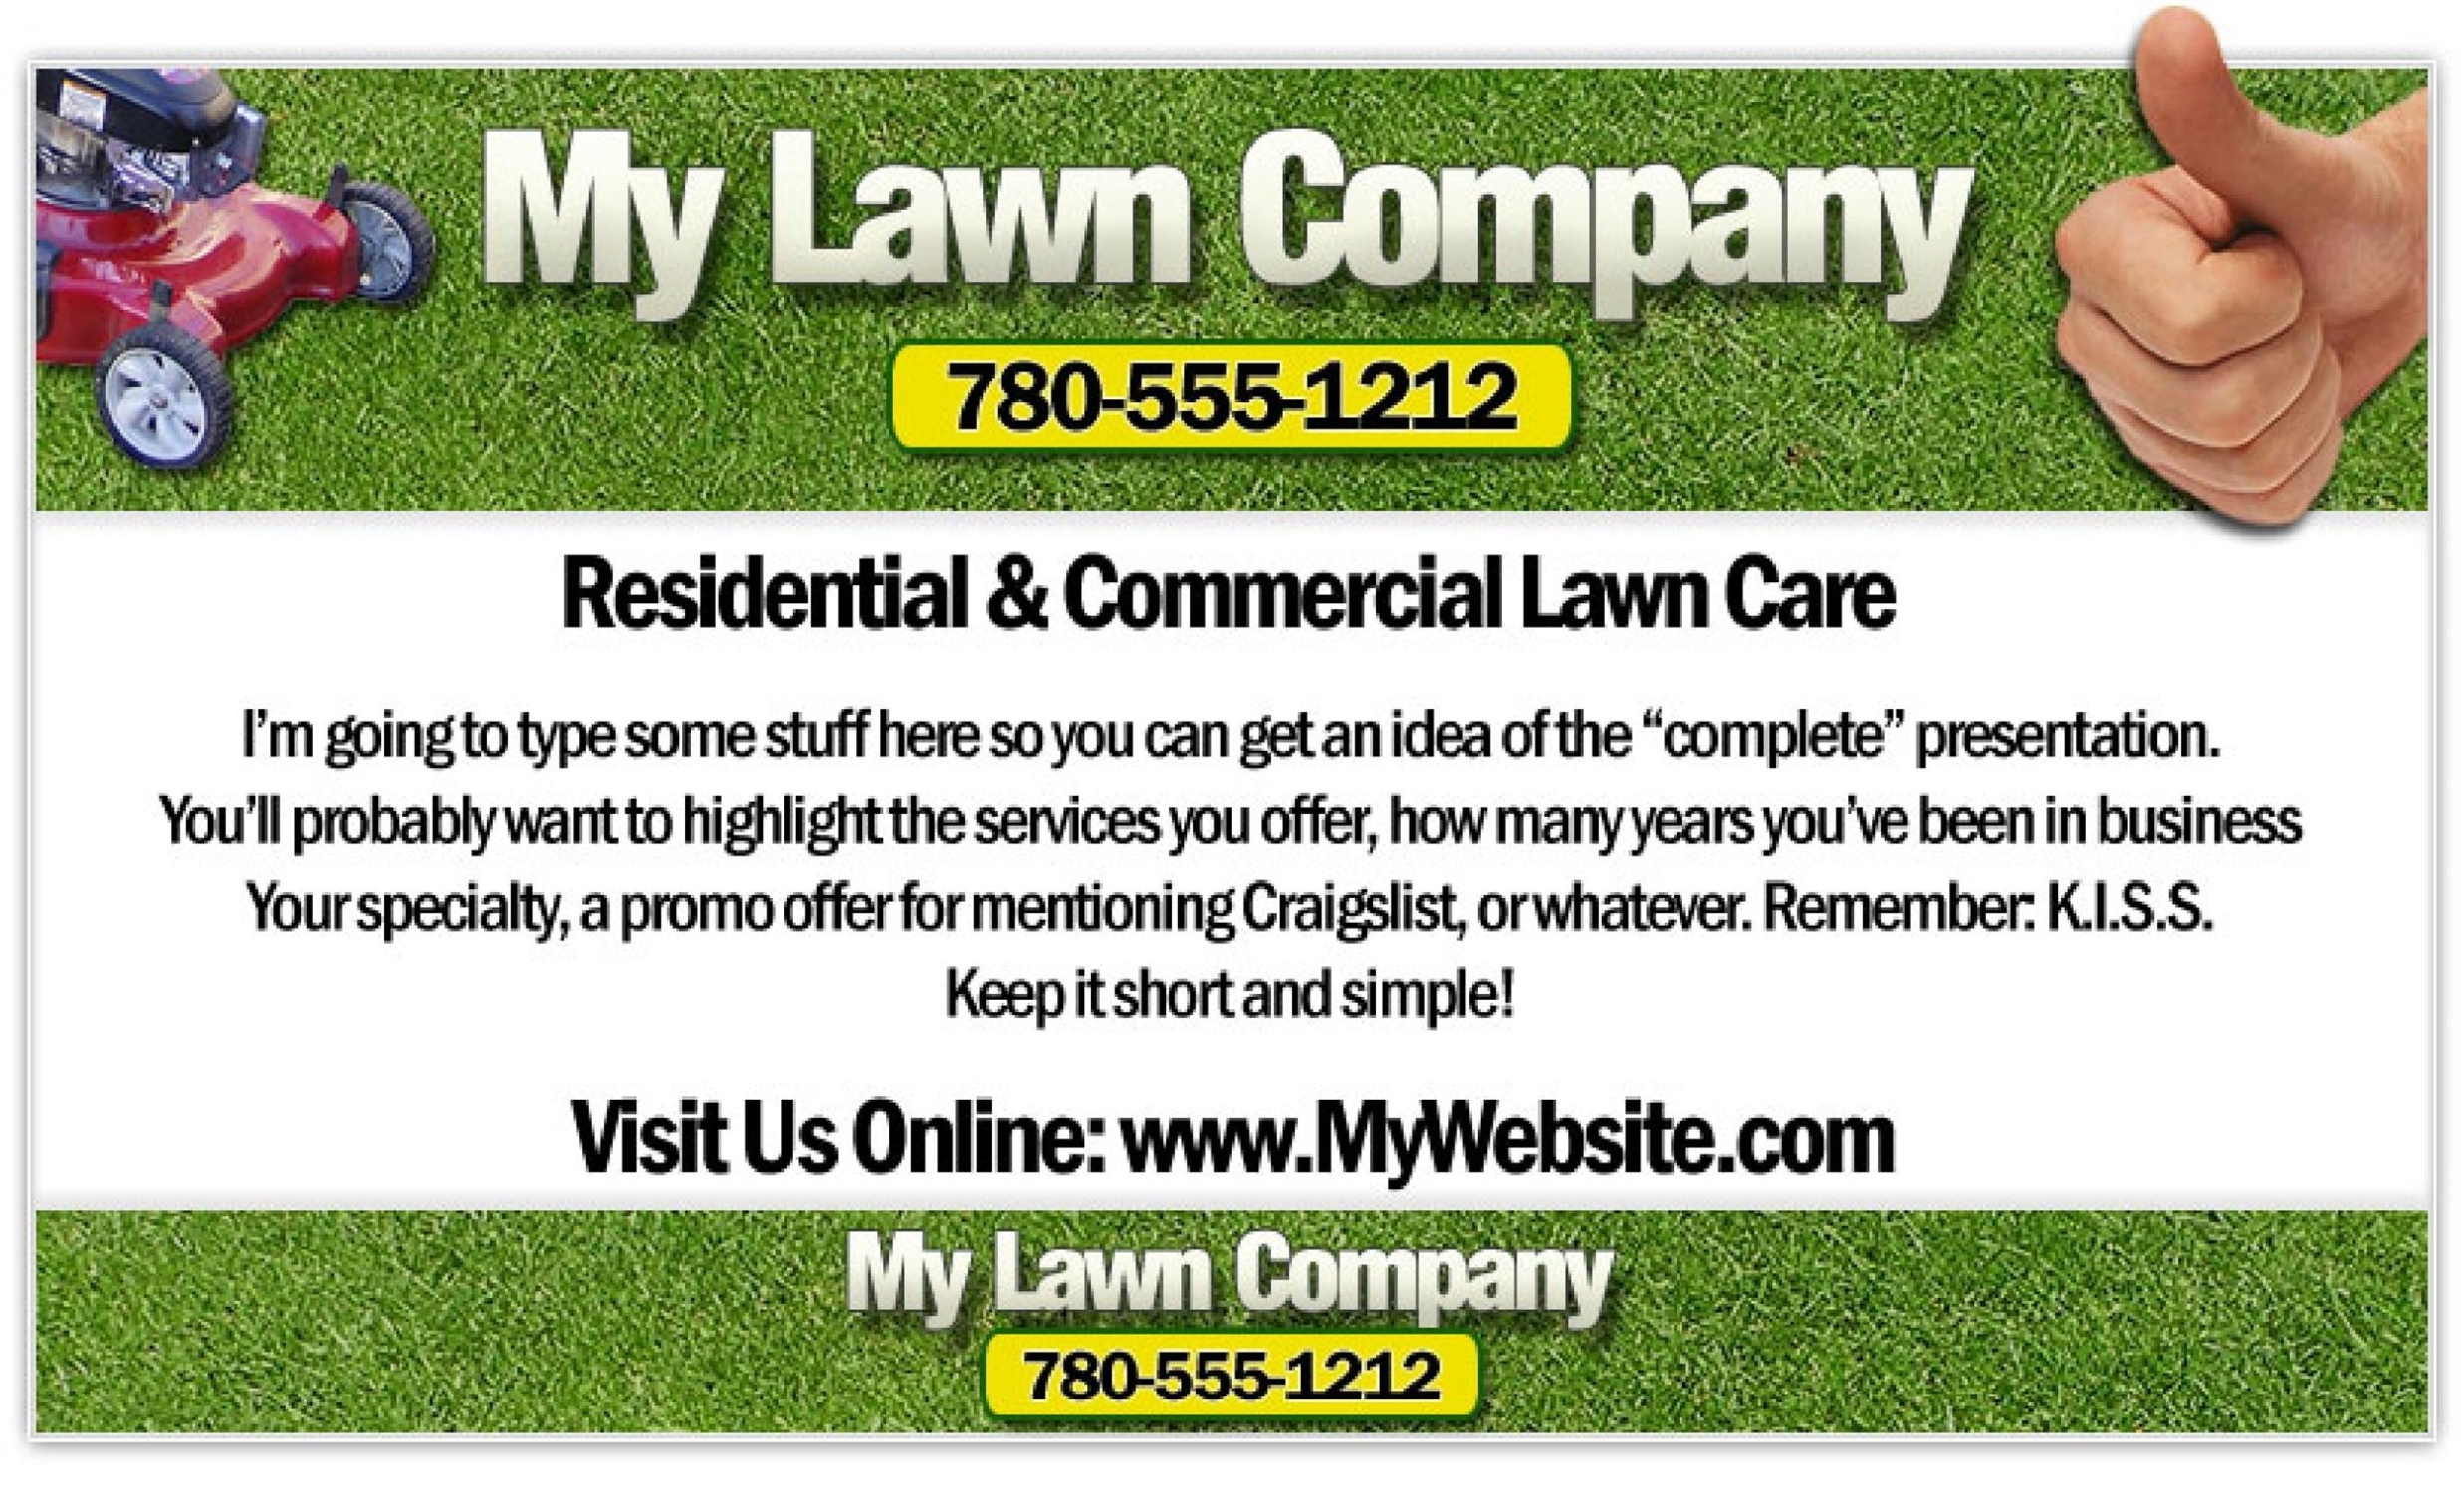 30 Free Lawn Care Flyer Templates [Lawn Mower Flyers] ᐅ Templatelab In Free Lawn Mowing Flyer Template